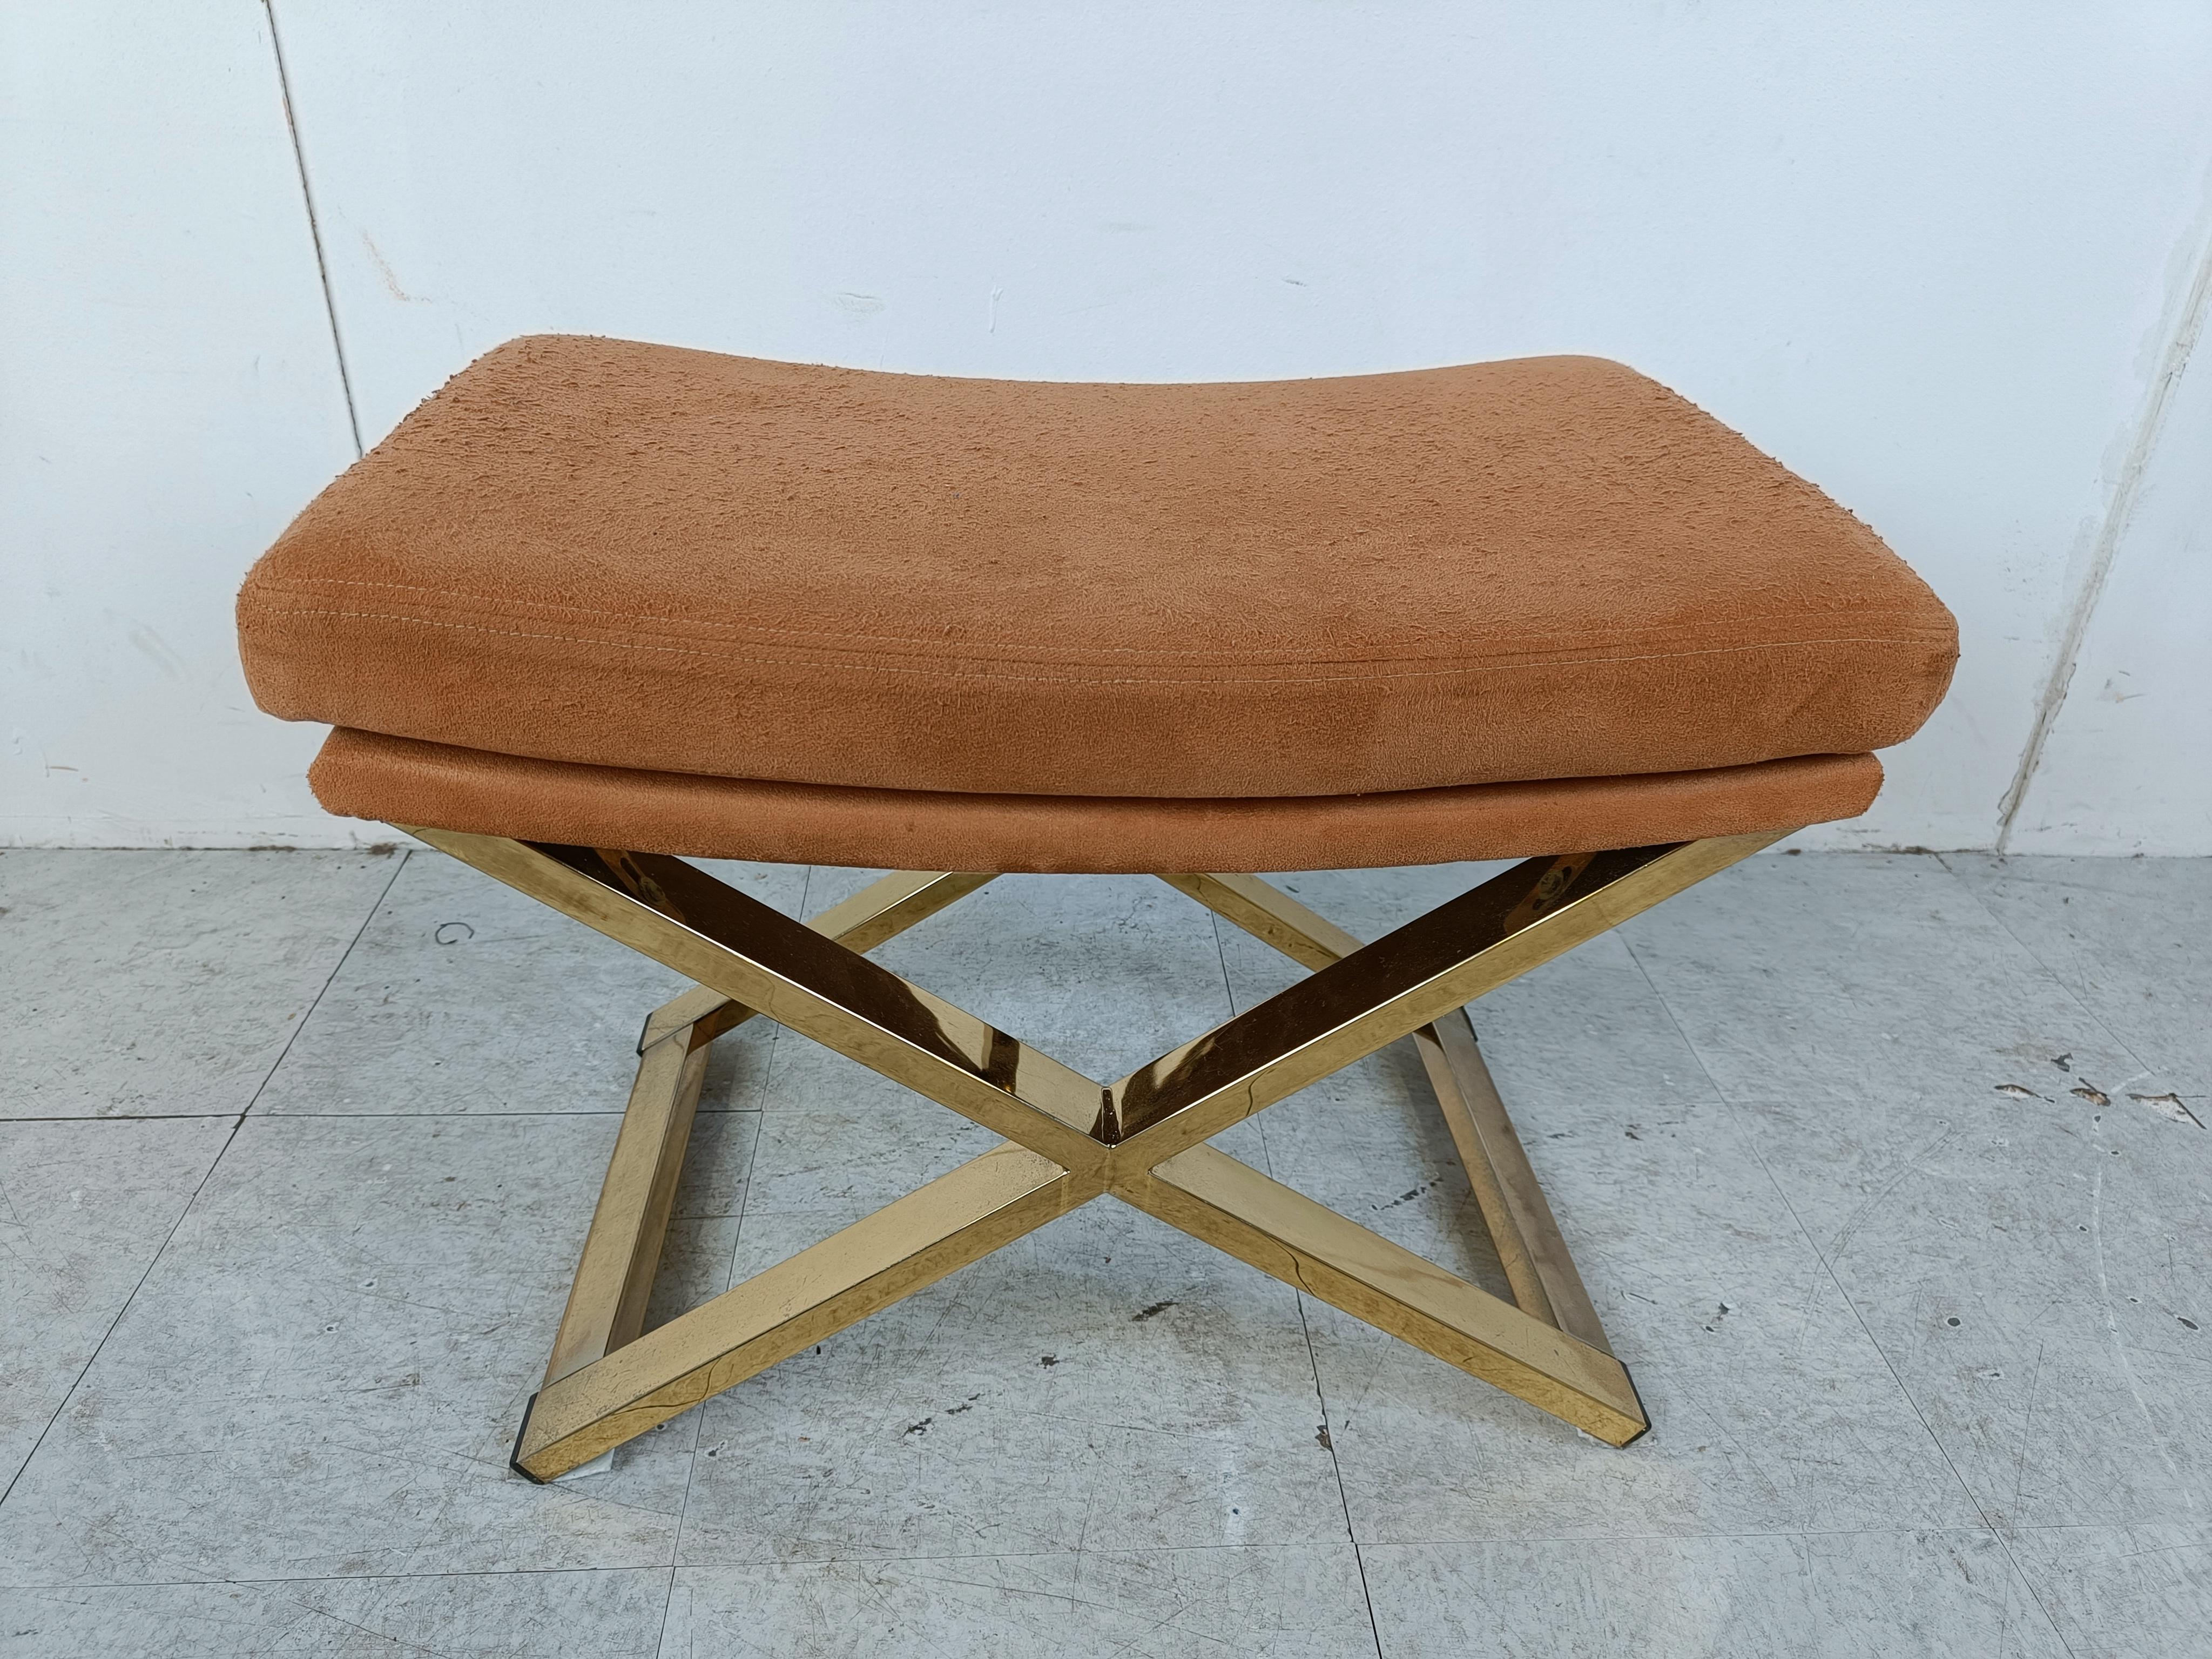 Vintage footstool with gold plate and alcantara upholstery made by Belgochrom.

A very high qualkity and good looking foot stool which adds a nice touch of seventies/eighties glam to your interior

1970s - Belgium

Dimensions:
Height: 45cm
Width: